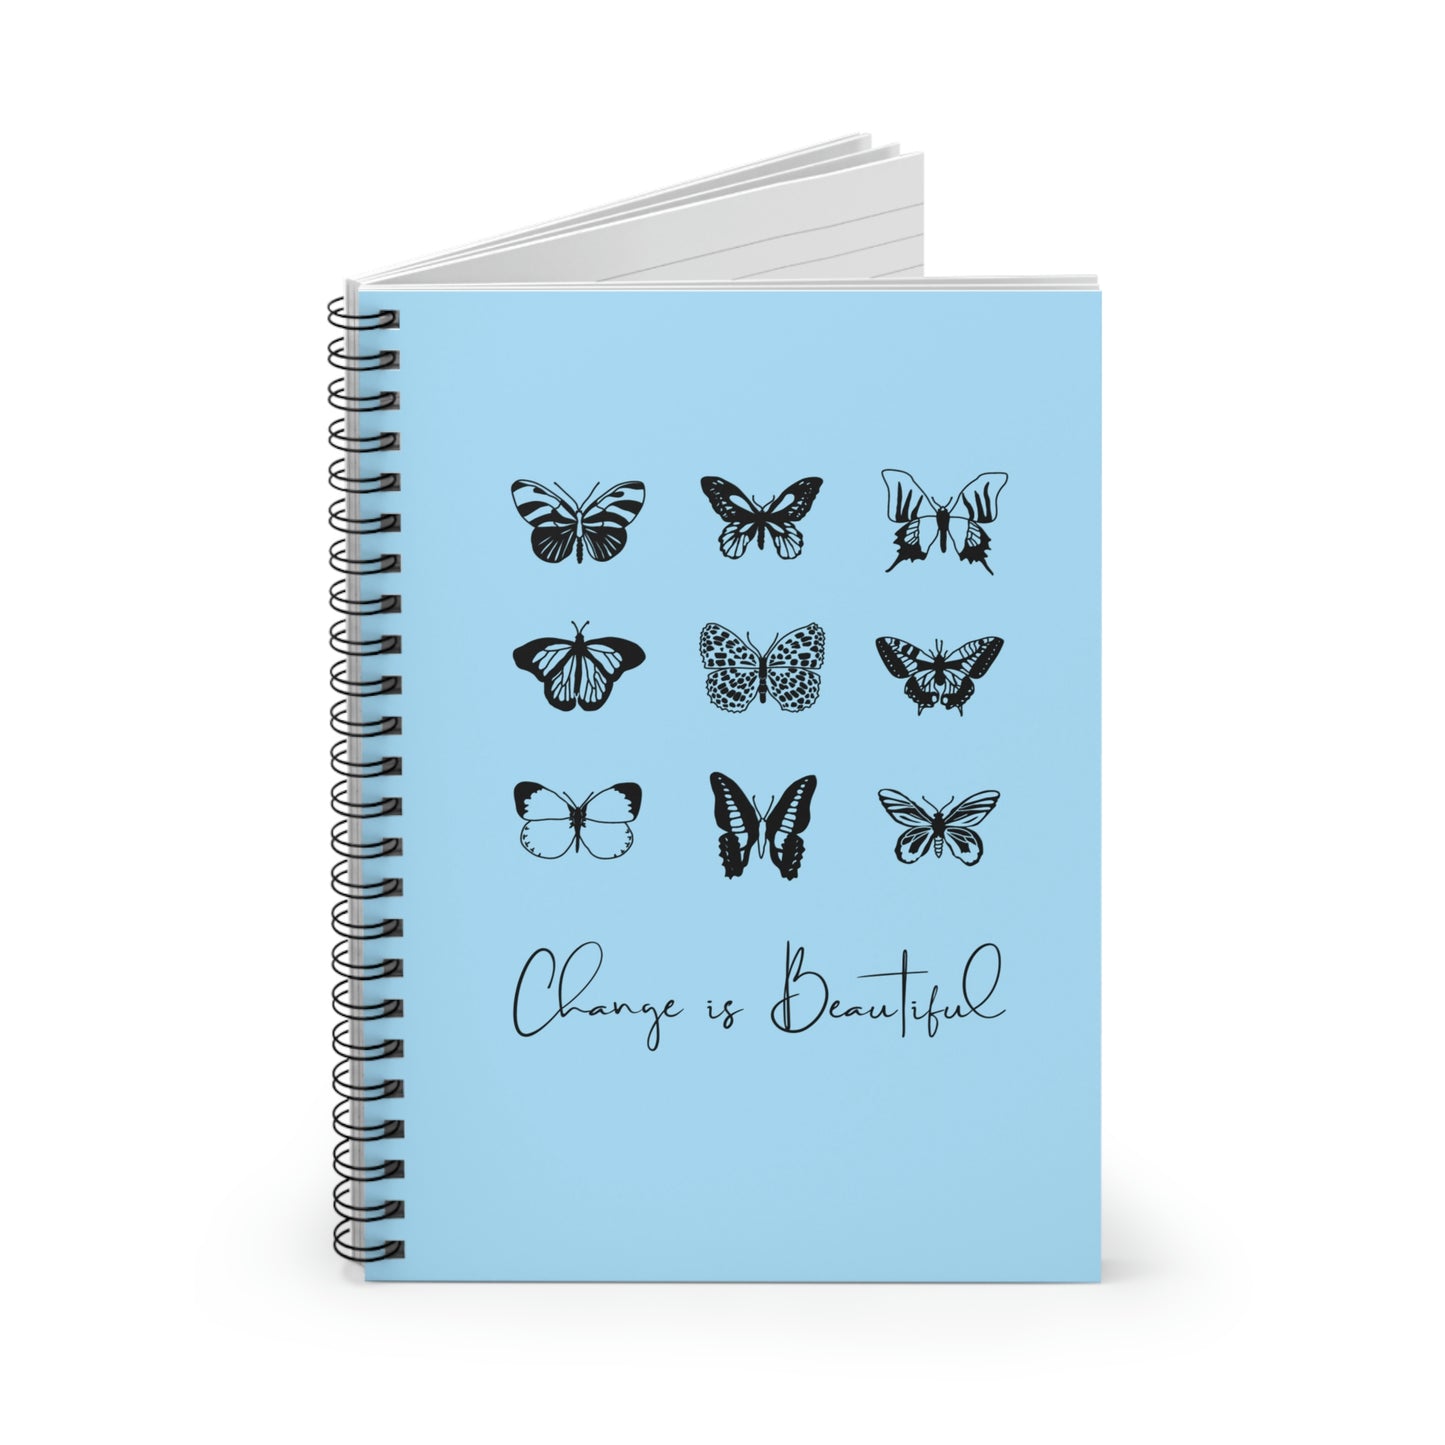 Change is Beautiful Butterfly Spiral Notebook - Ruled Line